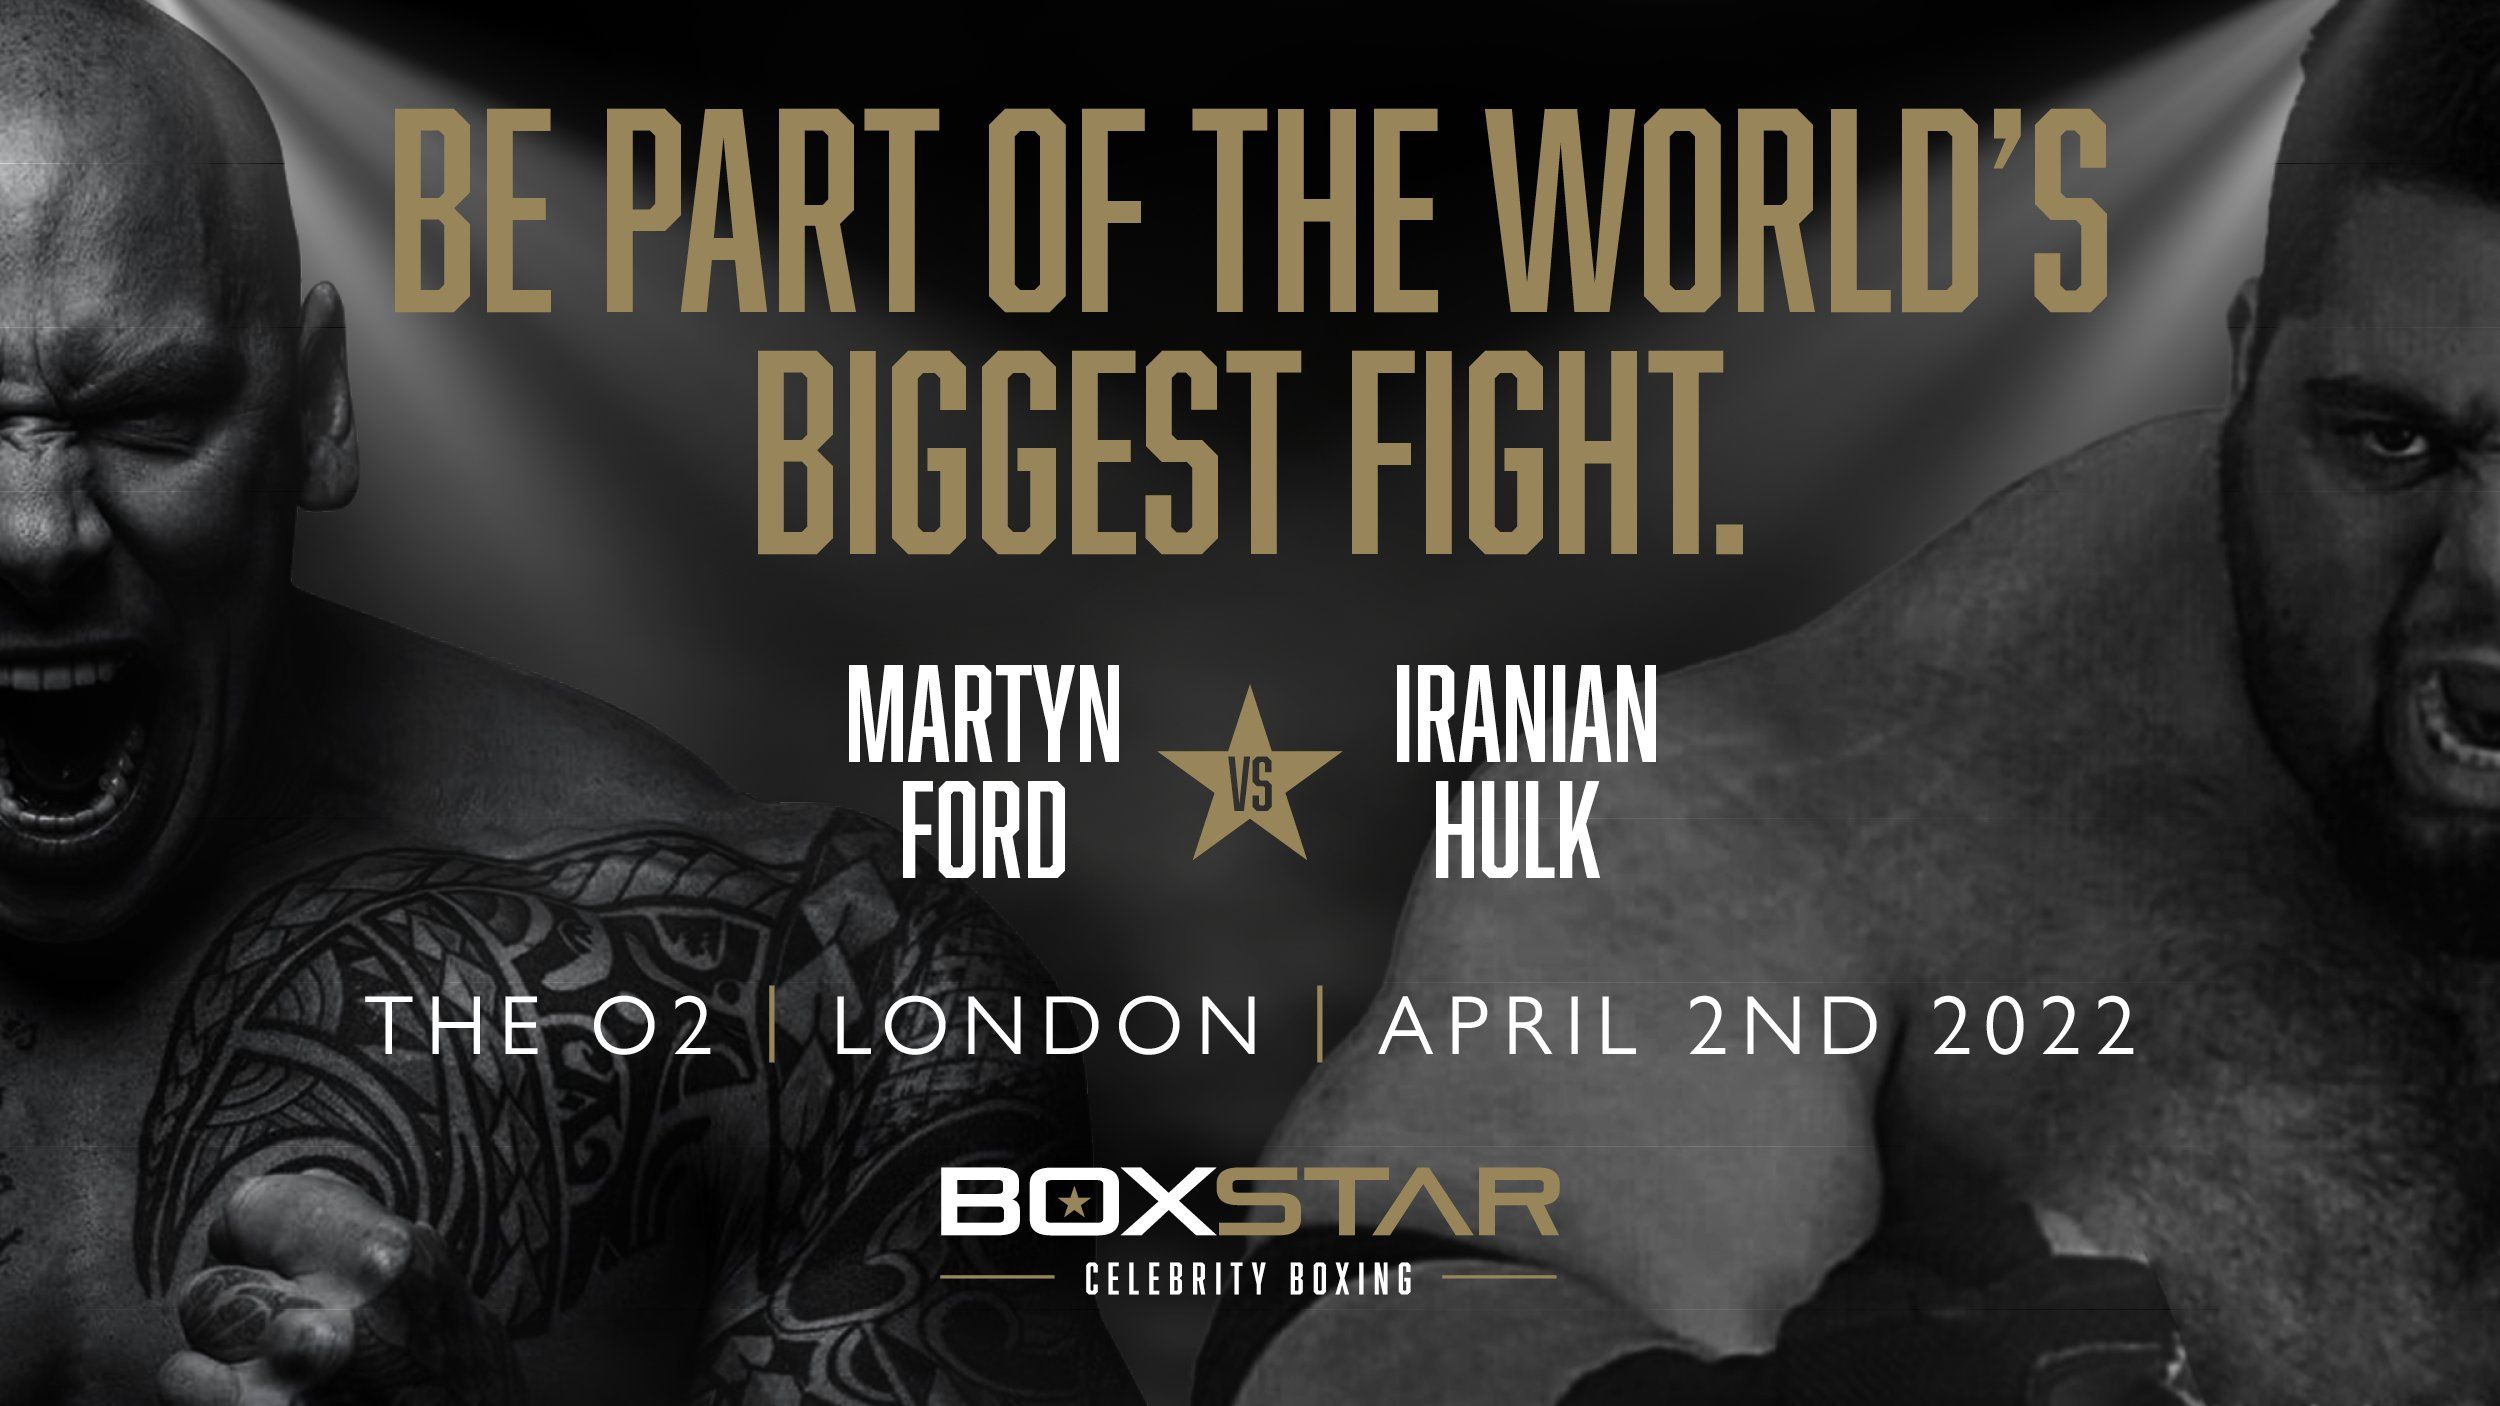 martyn-ford-iranian-hulk-boxing-date-weight-card-uk-start-time-ring-walks-tickets-live-stream-odds-and-more